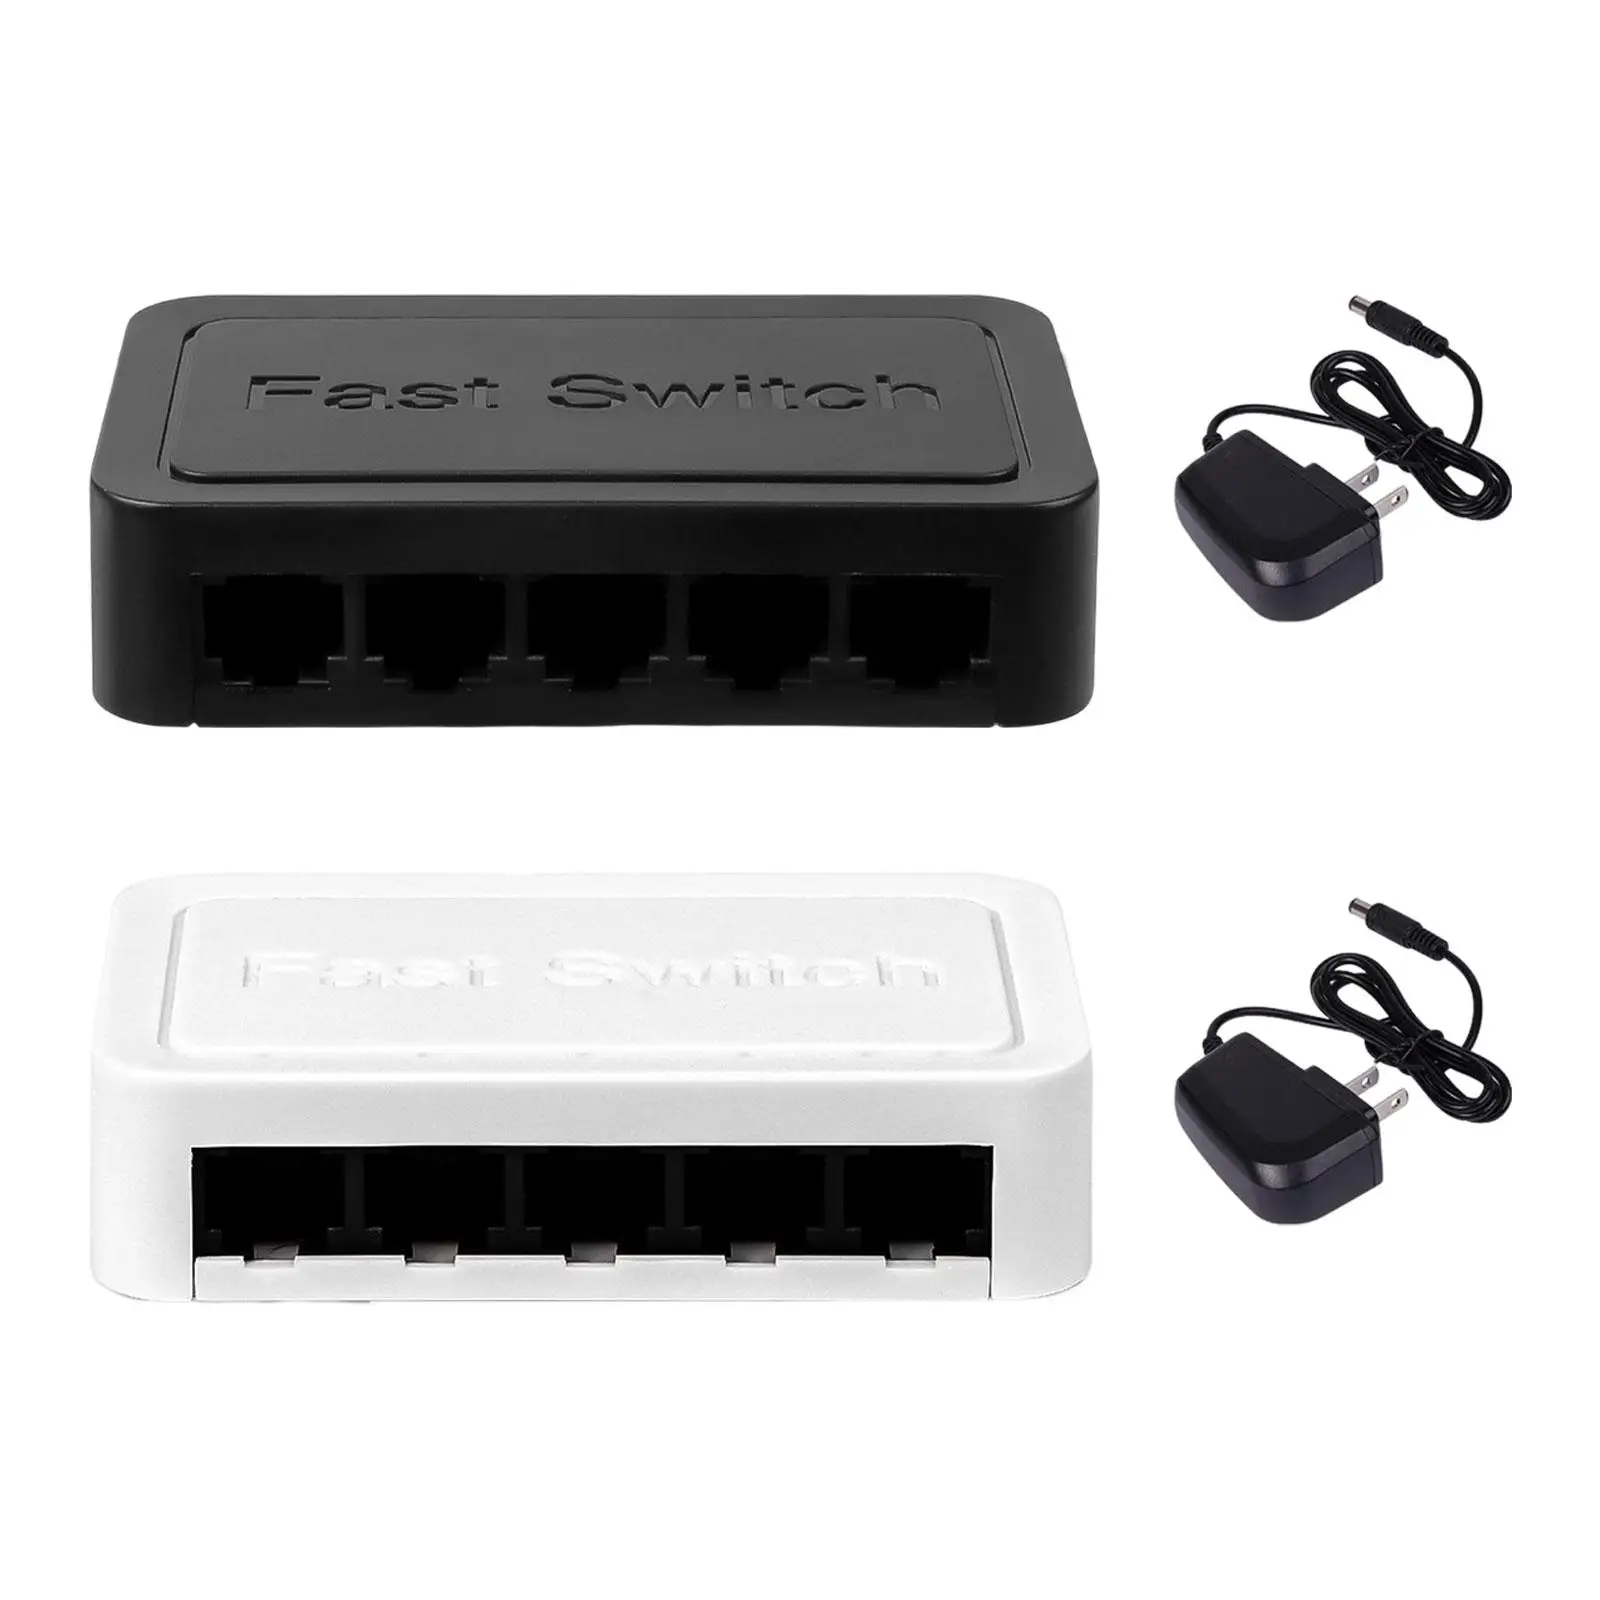 5 Port Gigabit Ethernet High Speed Fitments Easy to Use Mini Multifunction Switcher for Desktop Home Office Hotel Dormitory